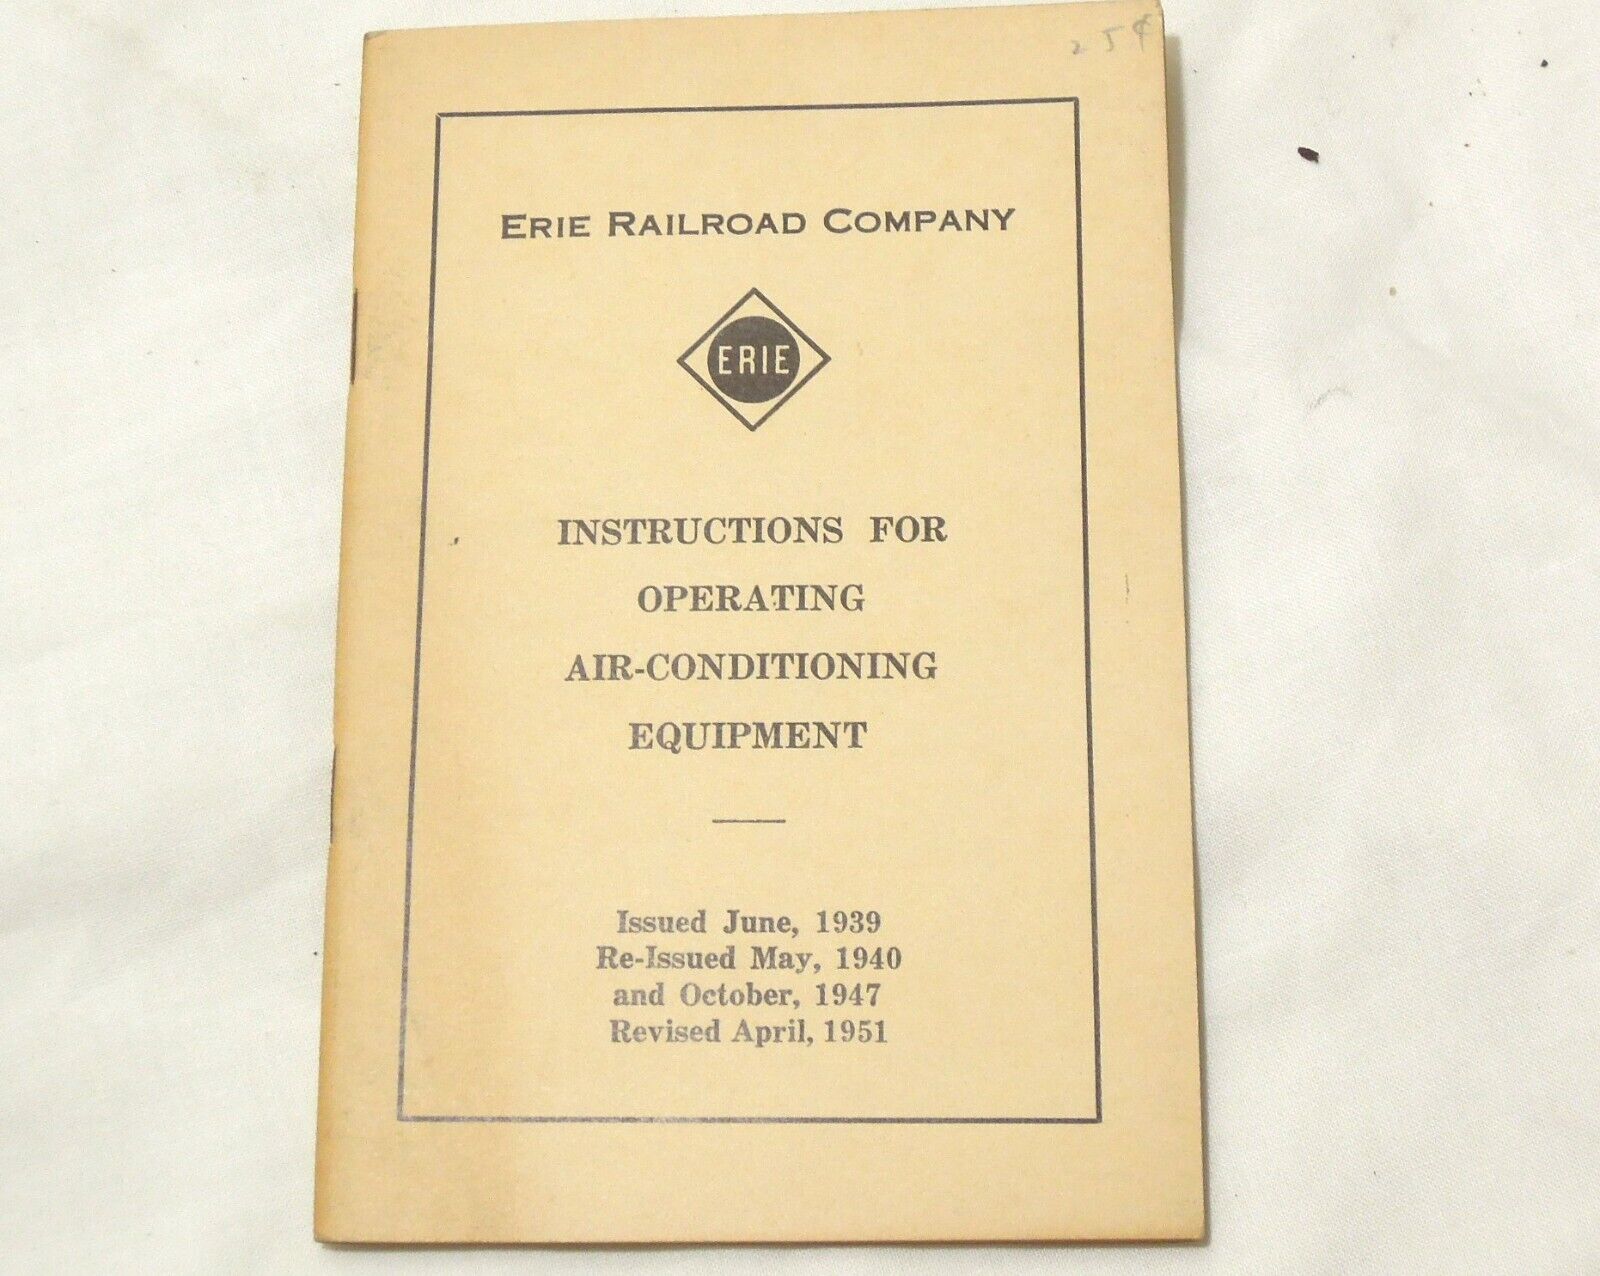 Erie Railroad Company 1951 Instructions for operating air conditioning equipment